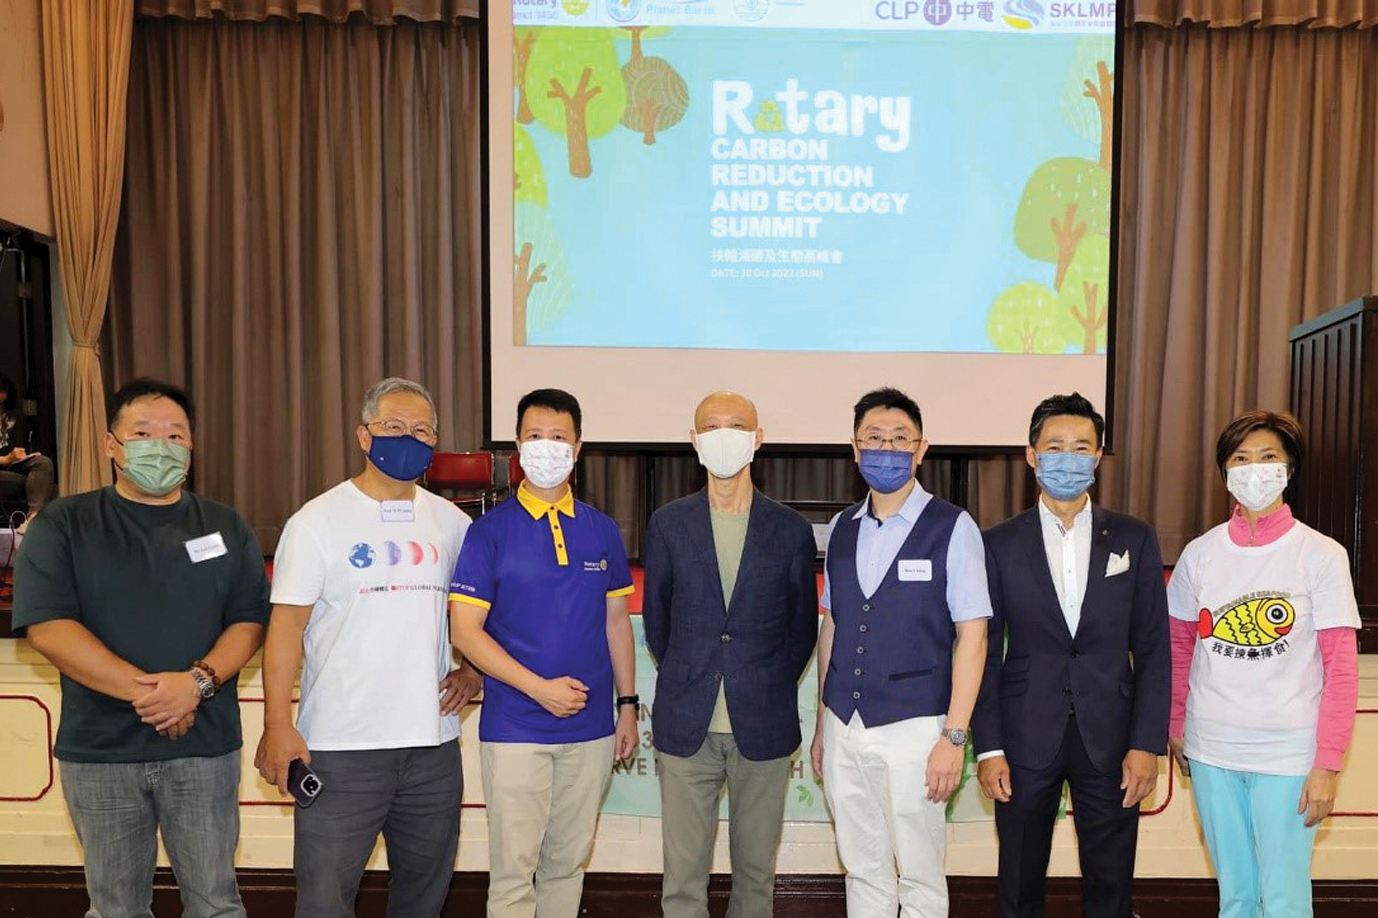 Rotary Carbon Reduction and Ecology Summit-2.1